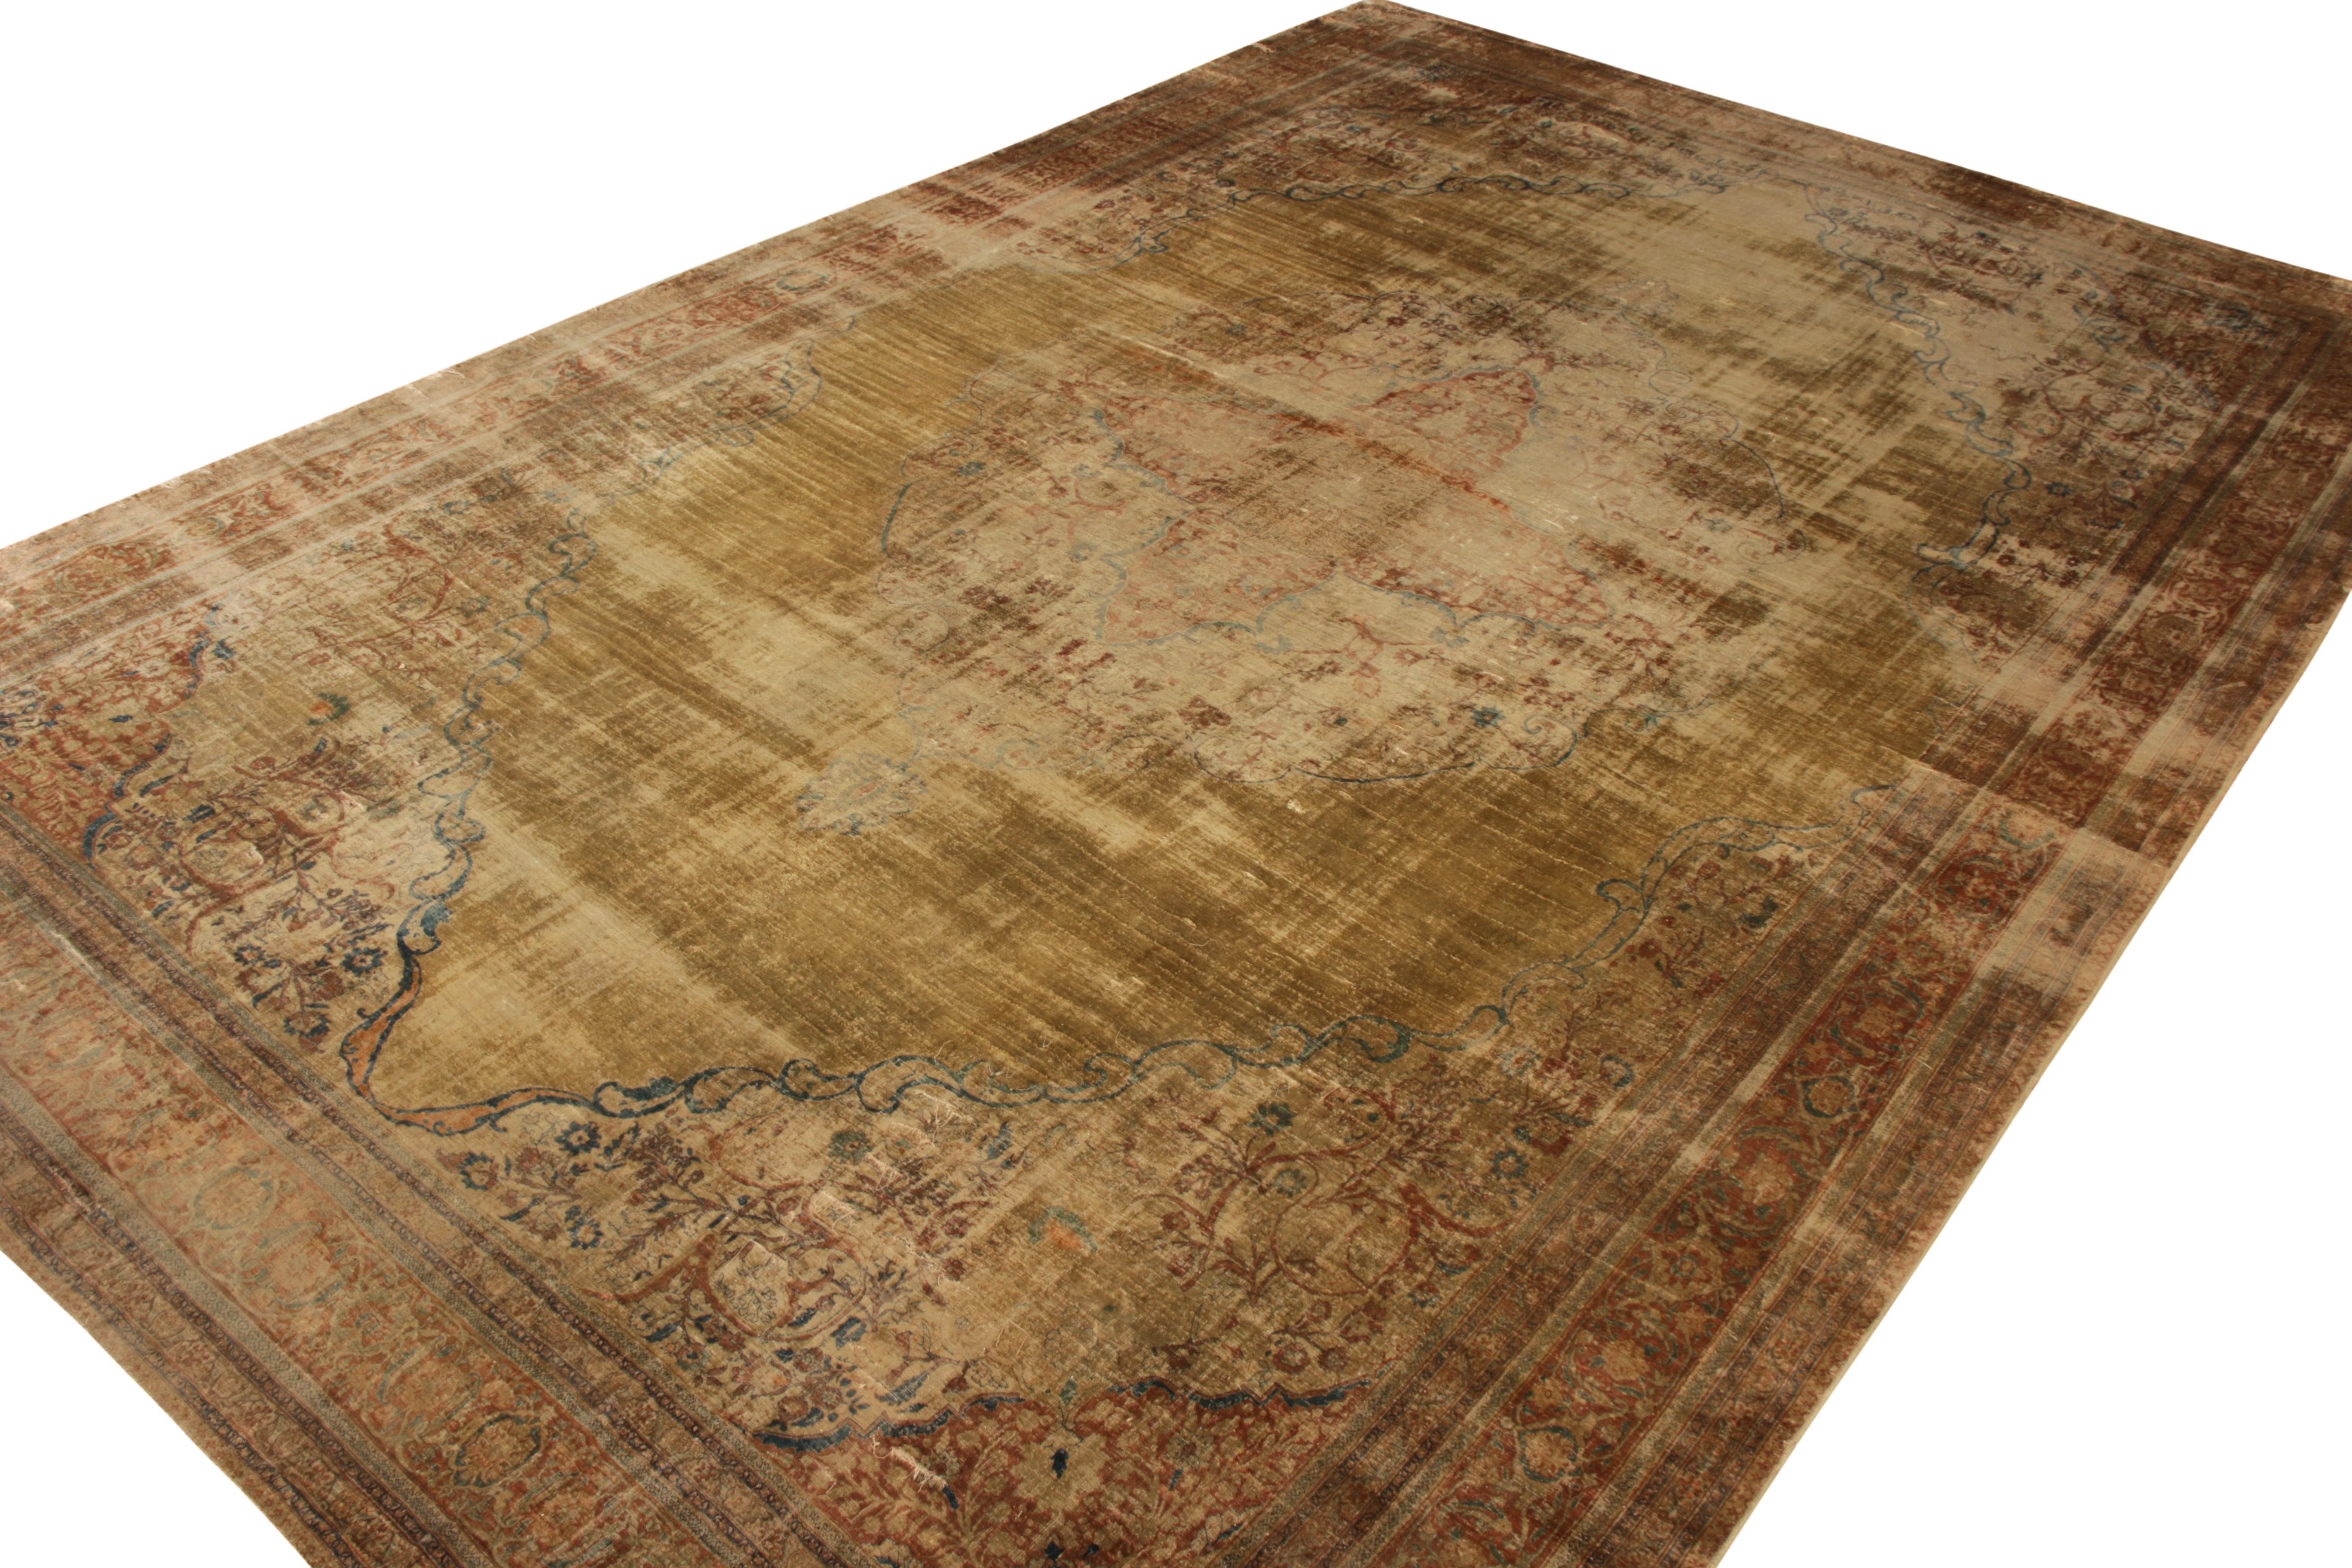 Hand-Knotted Antique Tabriz Persian Rug, Gold and Beige-Brown Medallion Pattern In Excellent Condition For Sale In Long Island City, NY